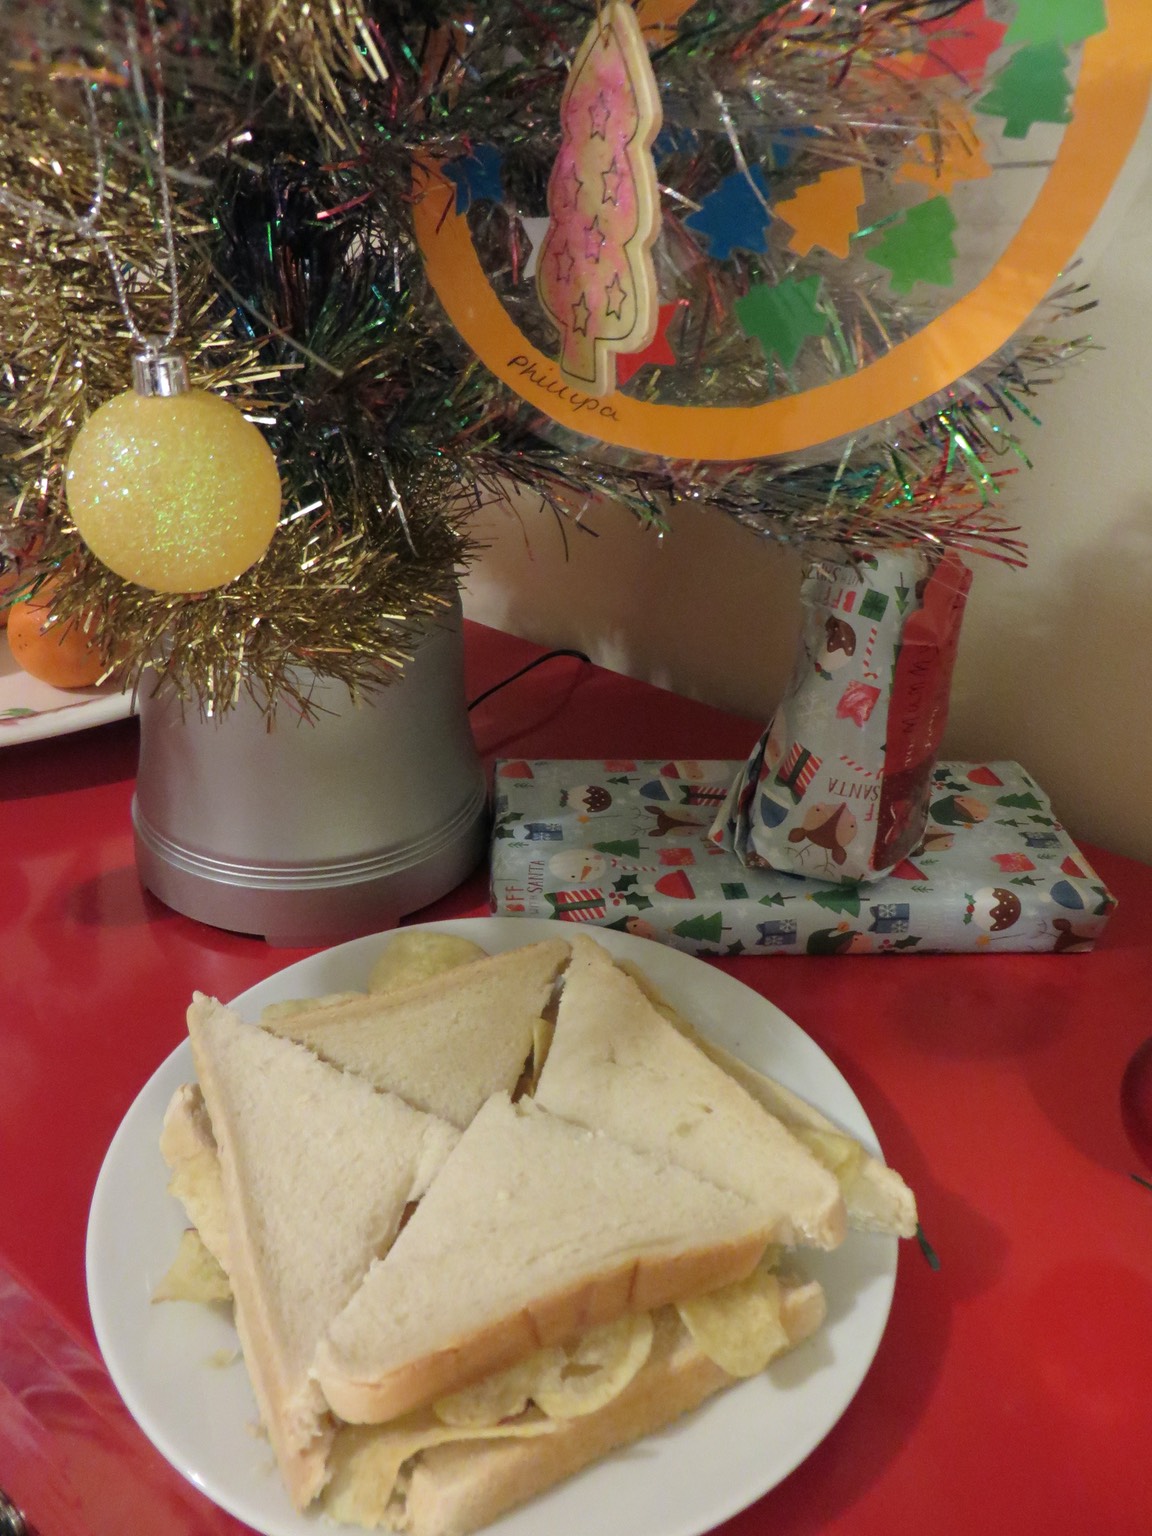 Quartered crisp sandwich with Christmas tree and gifts